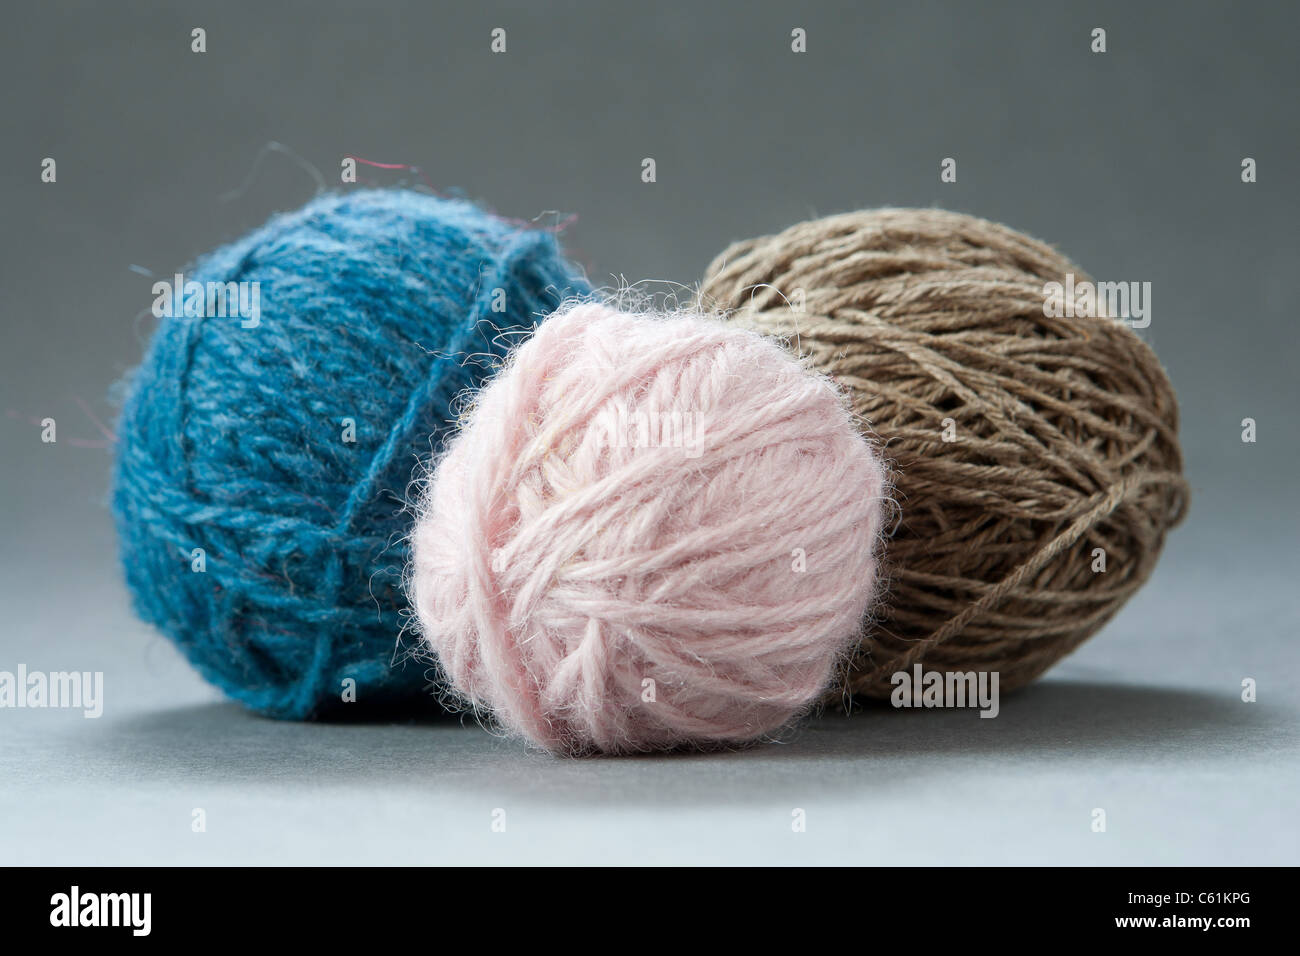 Selection of Different High Quality Yarn Balls Stock Photo